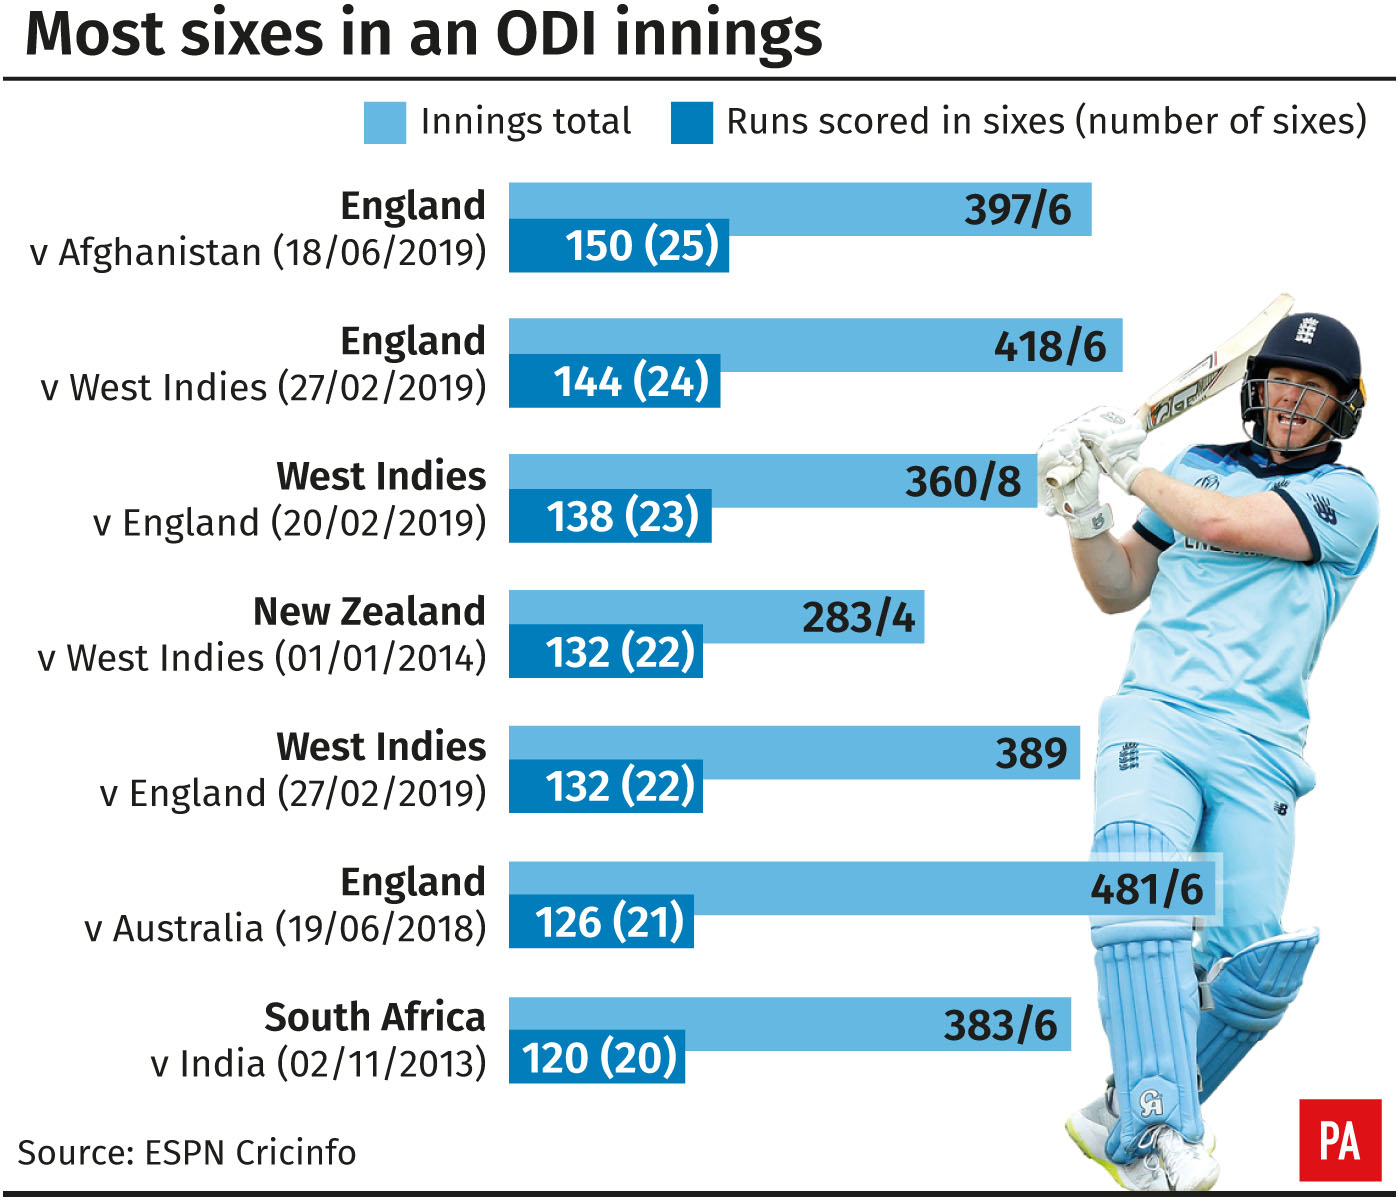 Most sixes in a one-day international innings